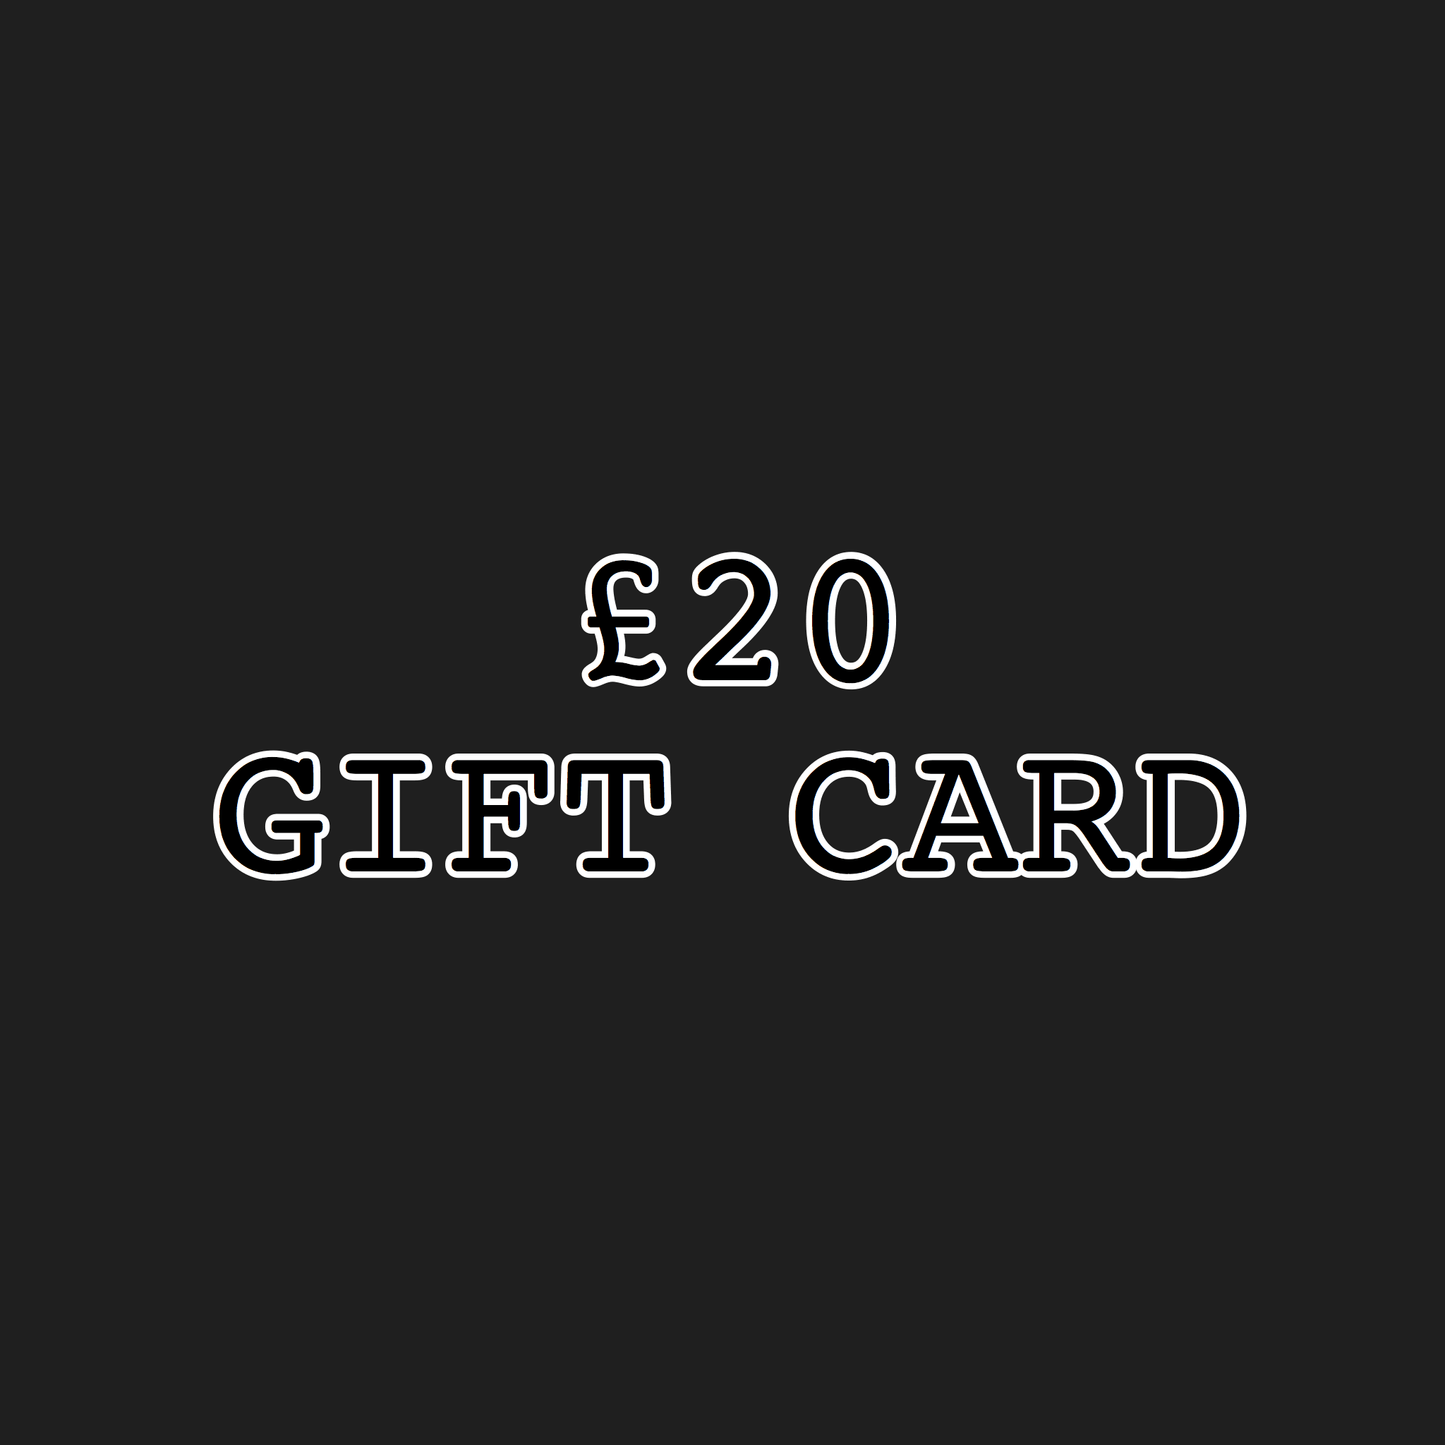 Gift Cards - amount of your choice £10-£50 - Woof Frills